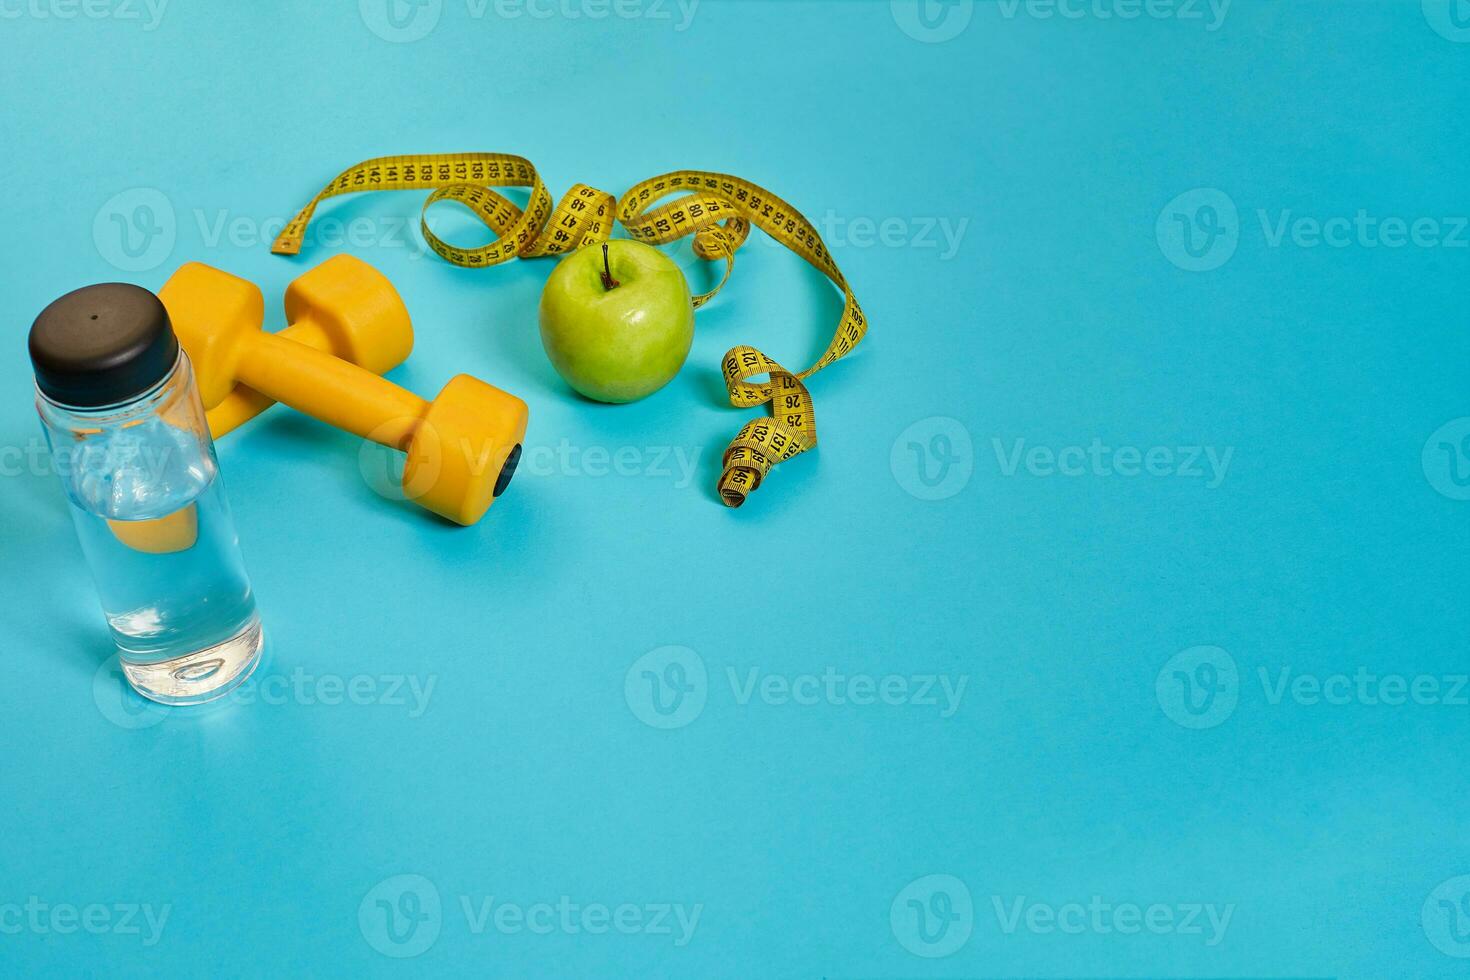 Dumbbells, centimeter, green apple, weight loss, healthy eating, healthy lifestyle concept photo